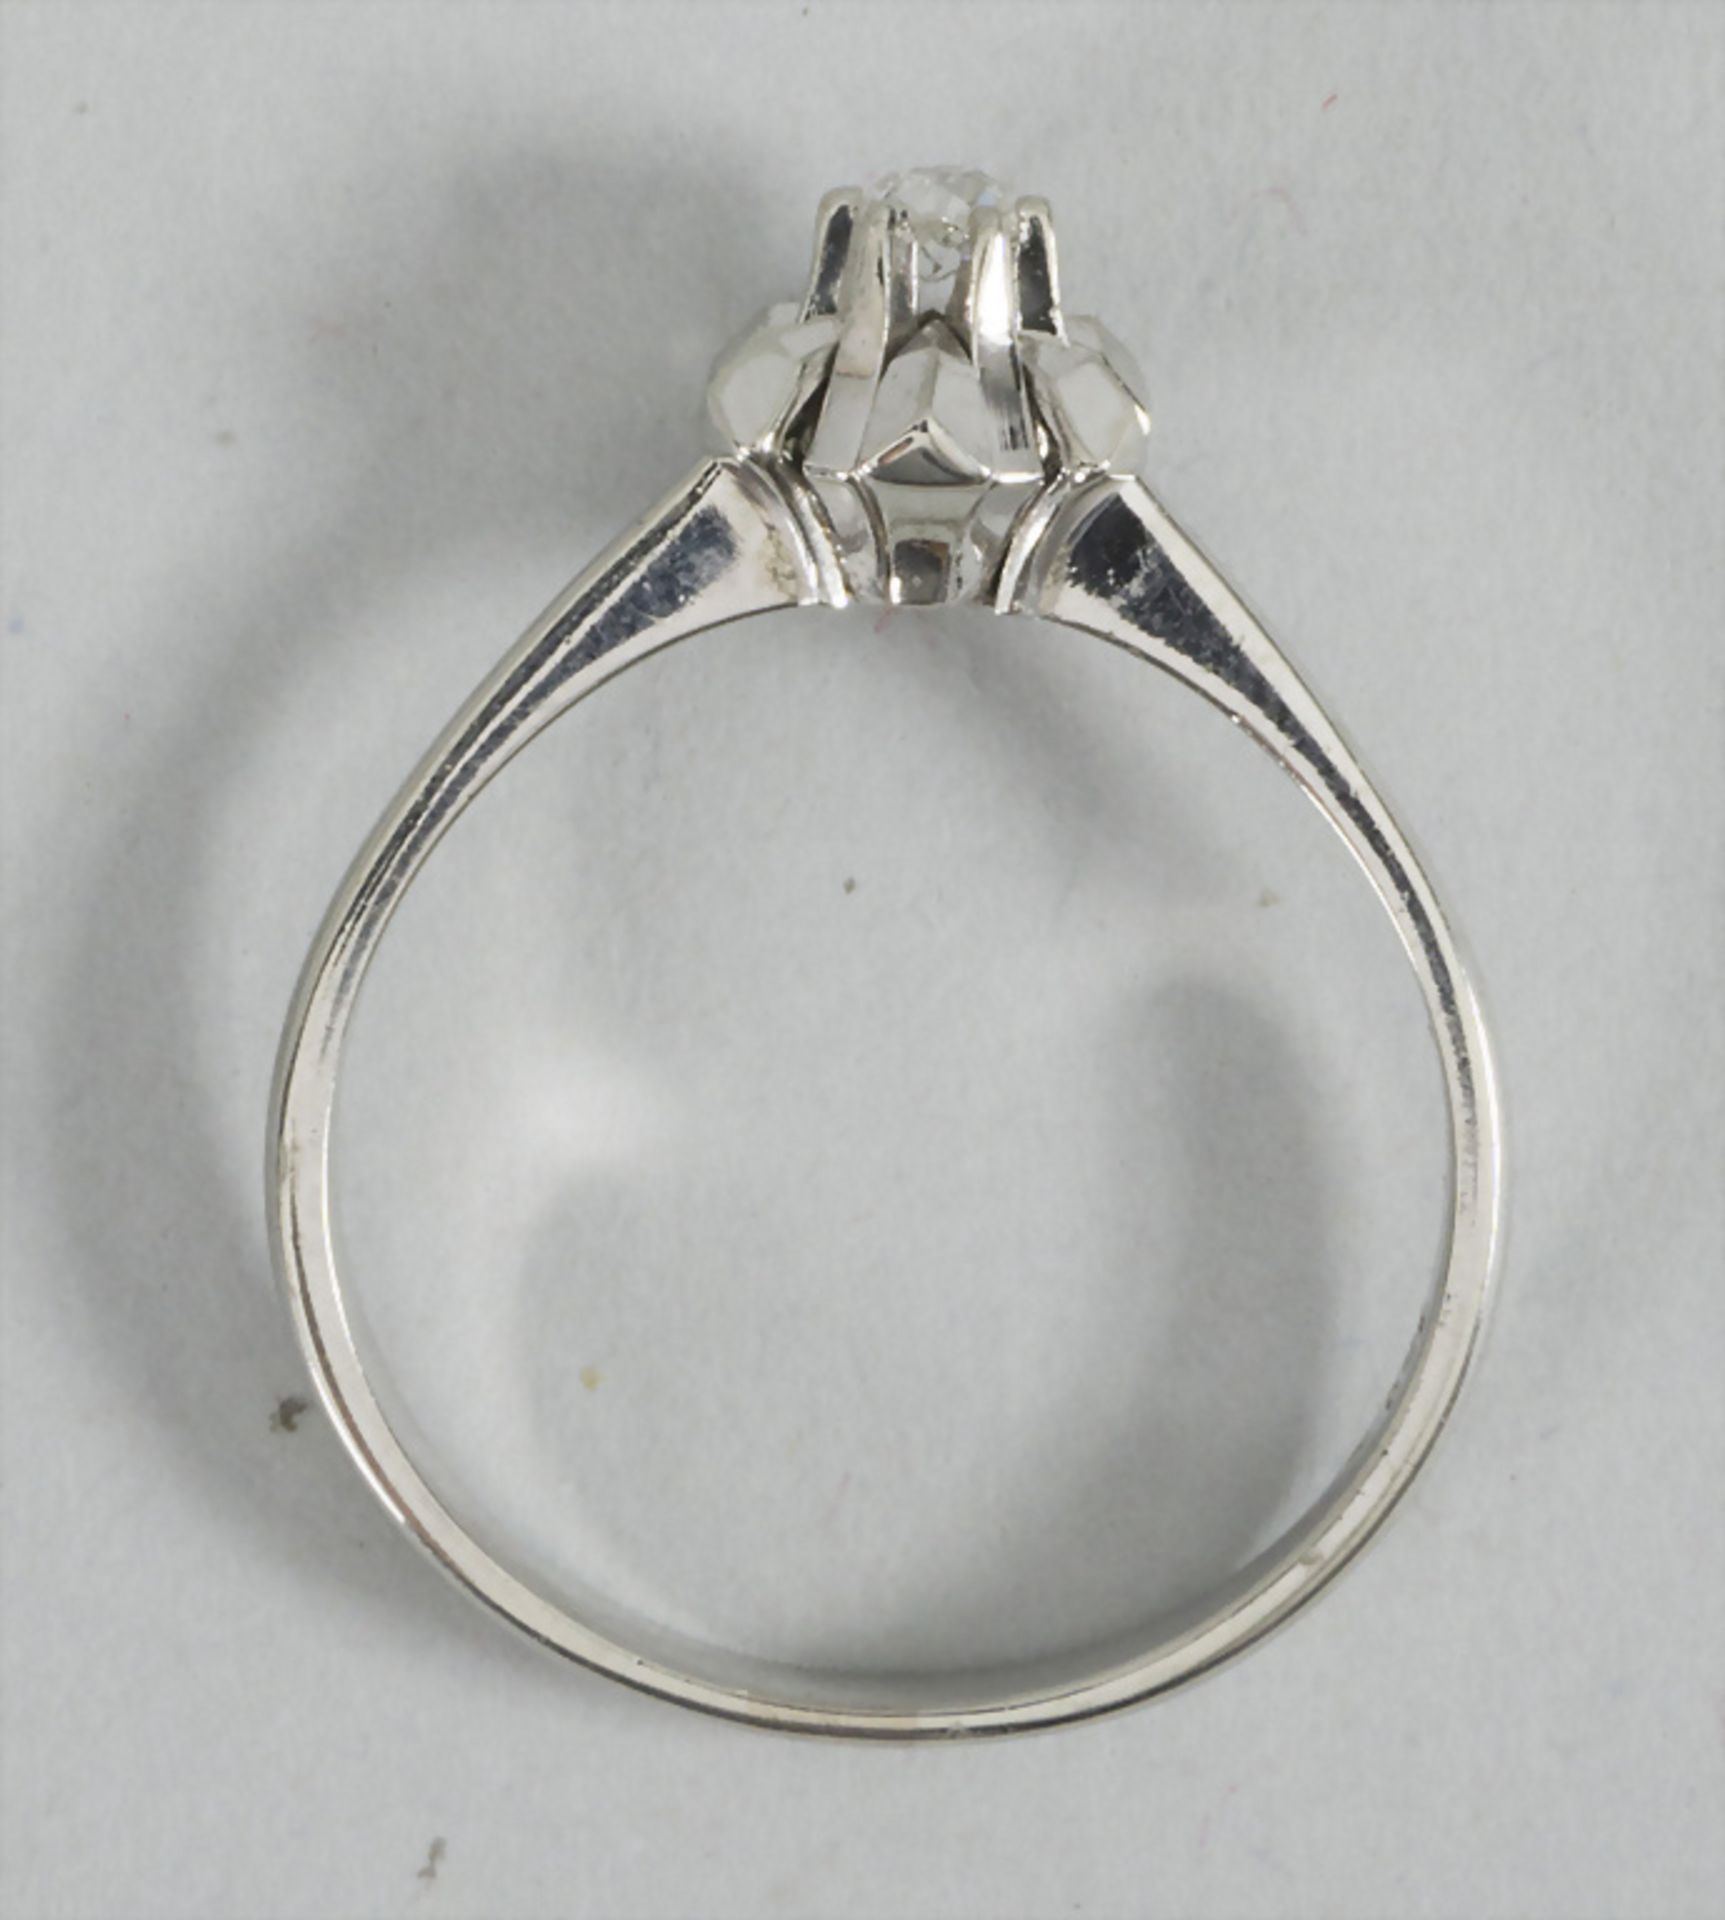 Brillant Solitärring / A brilliant solitaire ring in 18k gold - Image 4 of 6